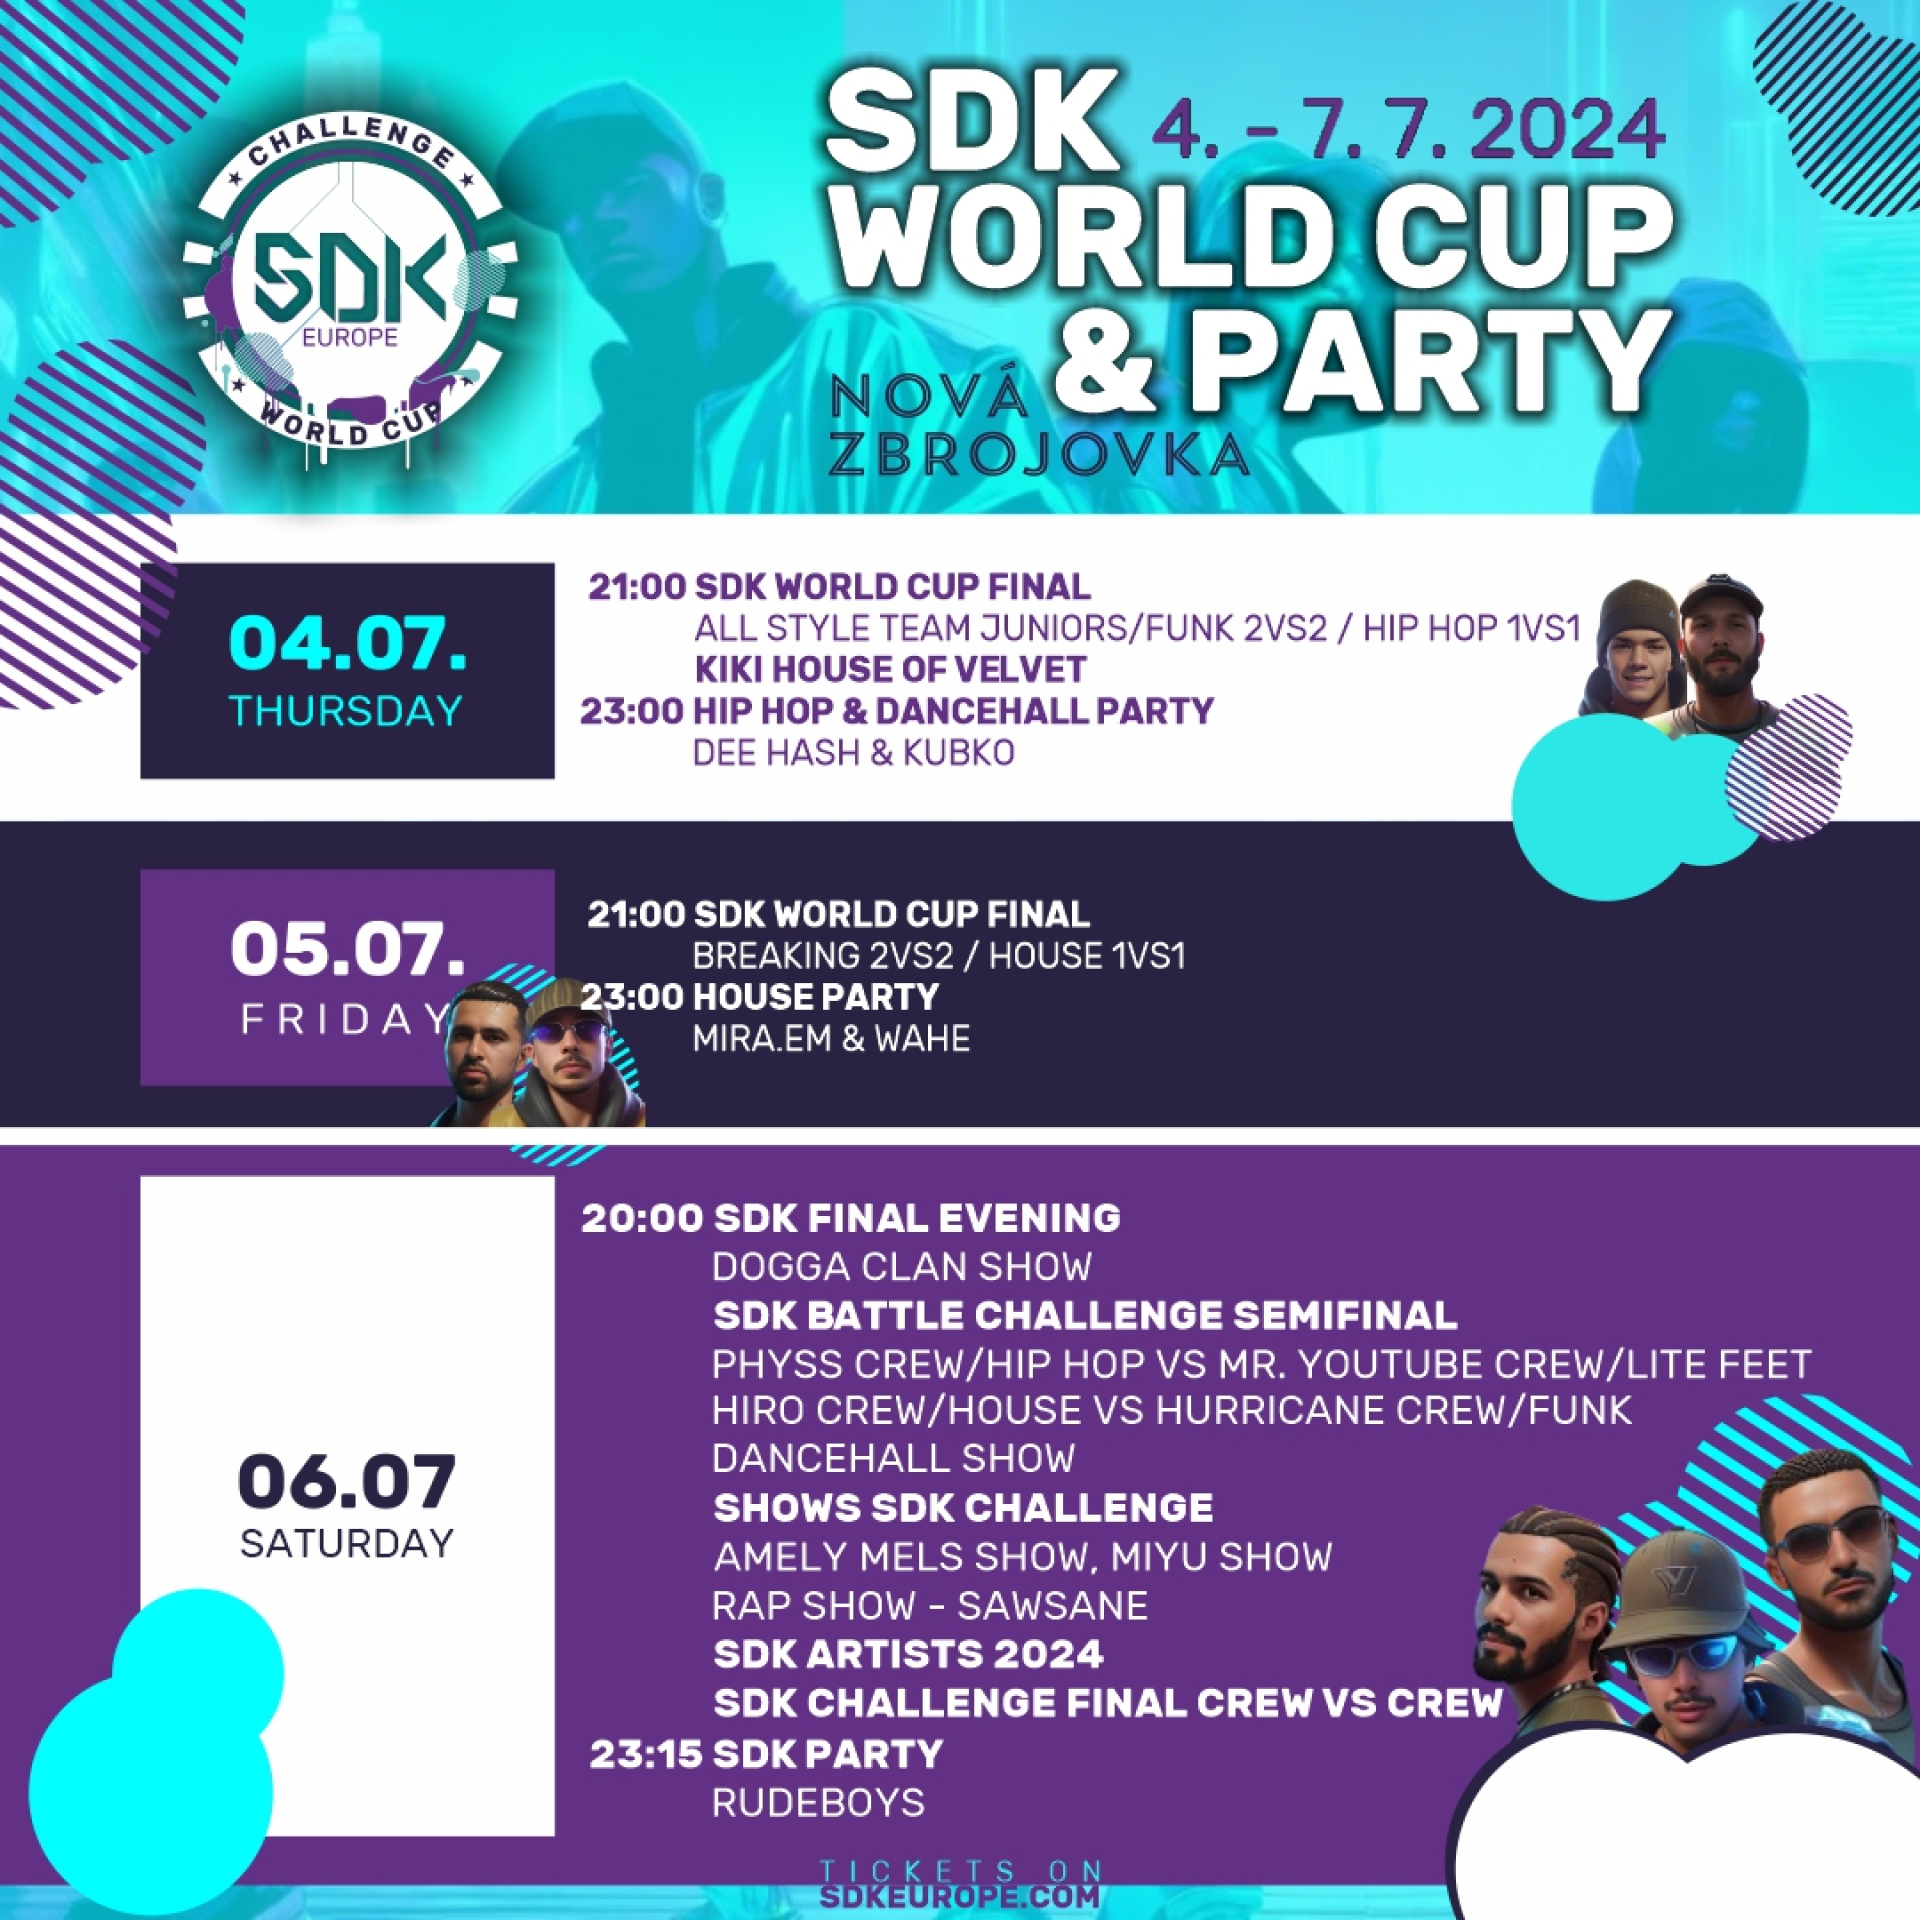 8fedf5cd-world-cup-and-party-ig.jpeg